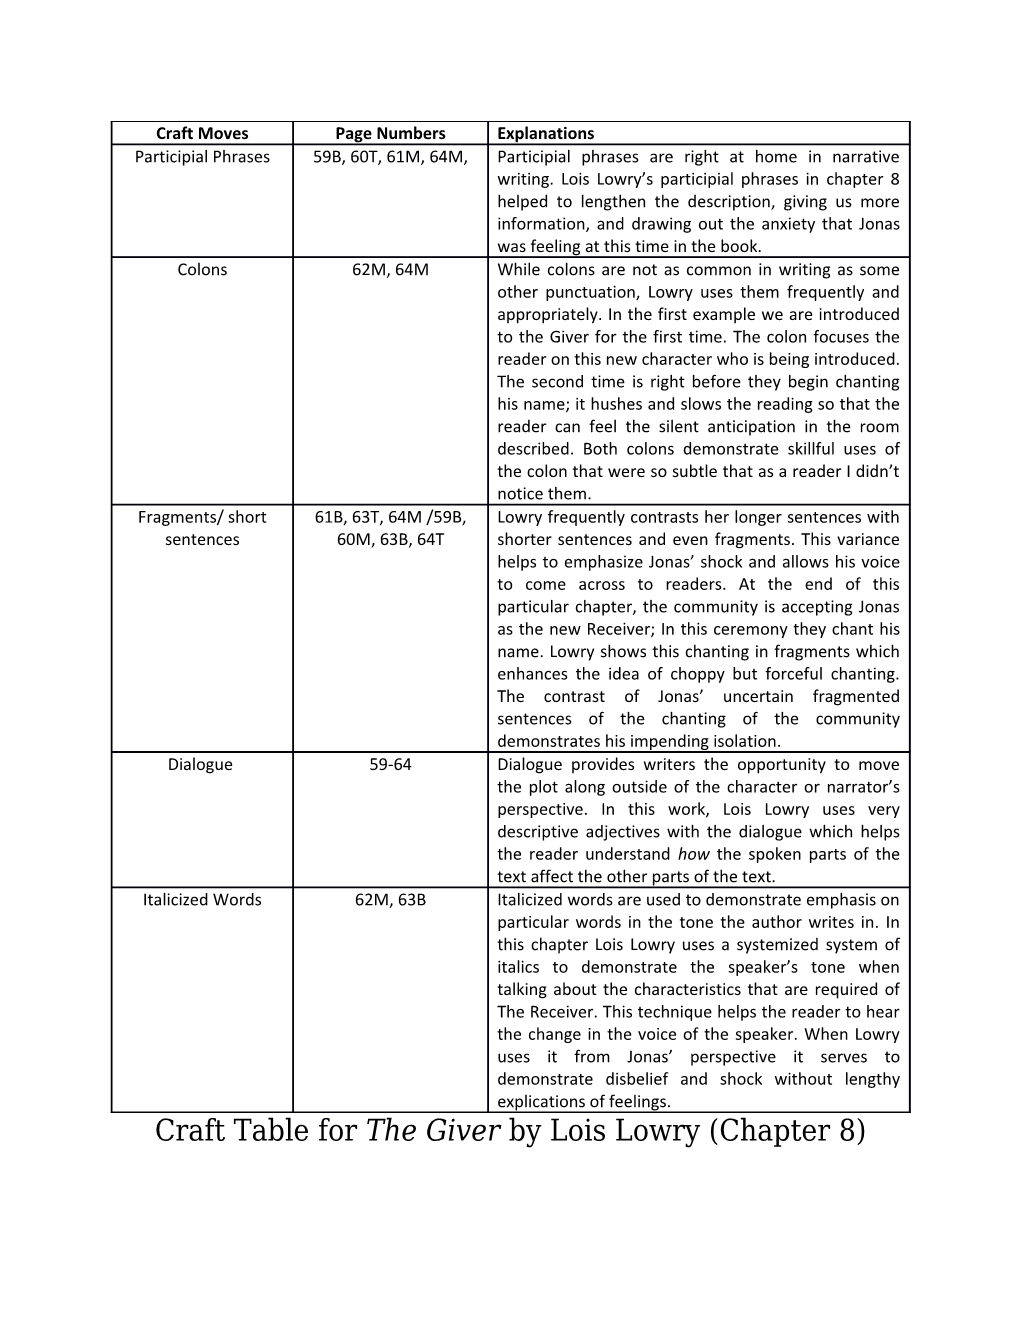 Craft Table for the Giver by Lois Lowry (Chapter 8)